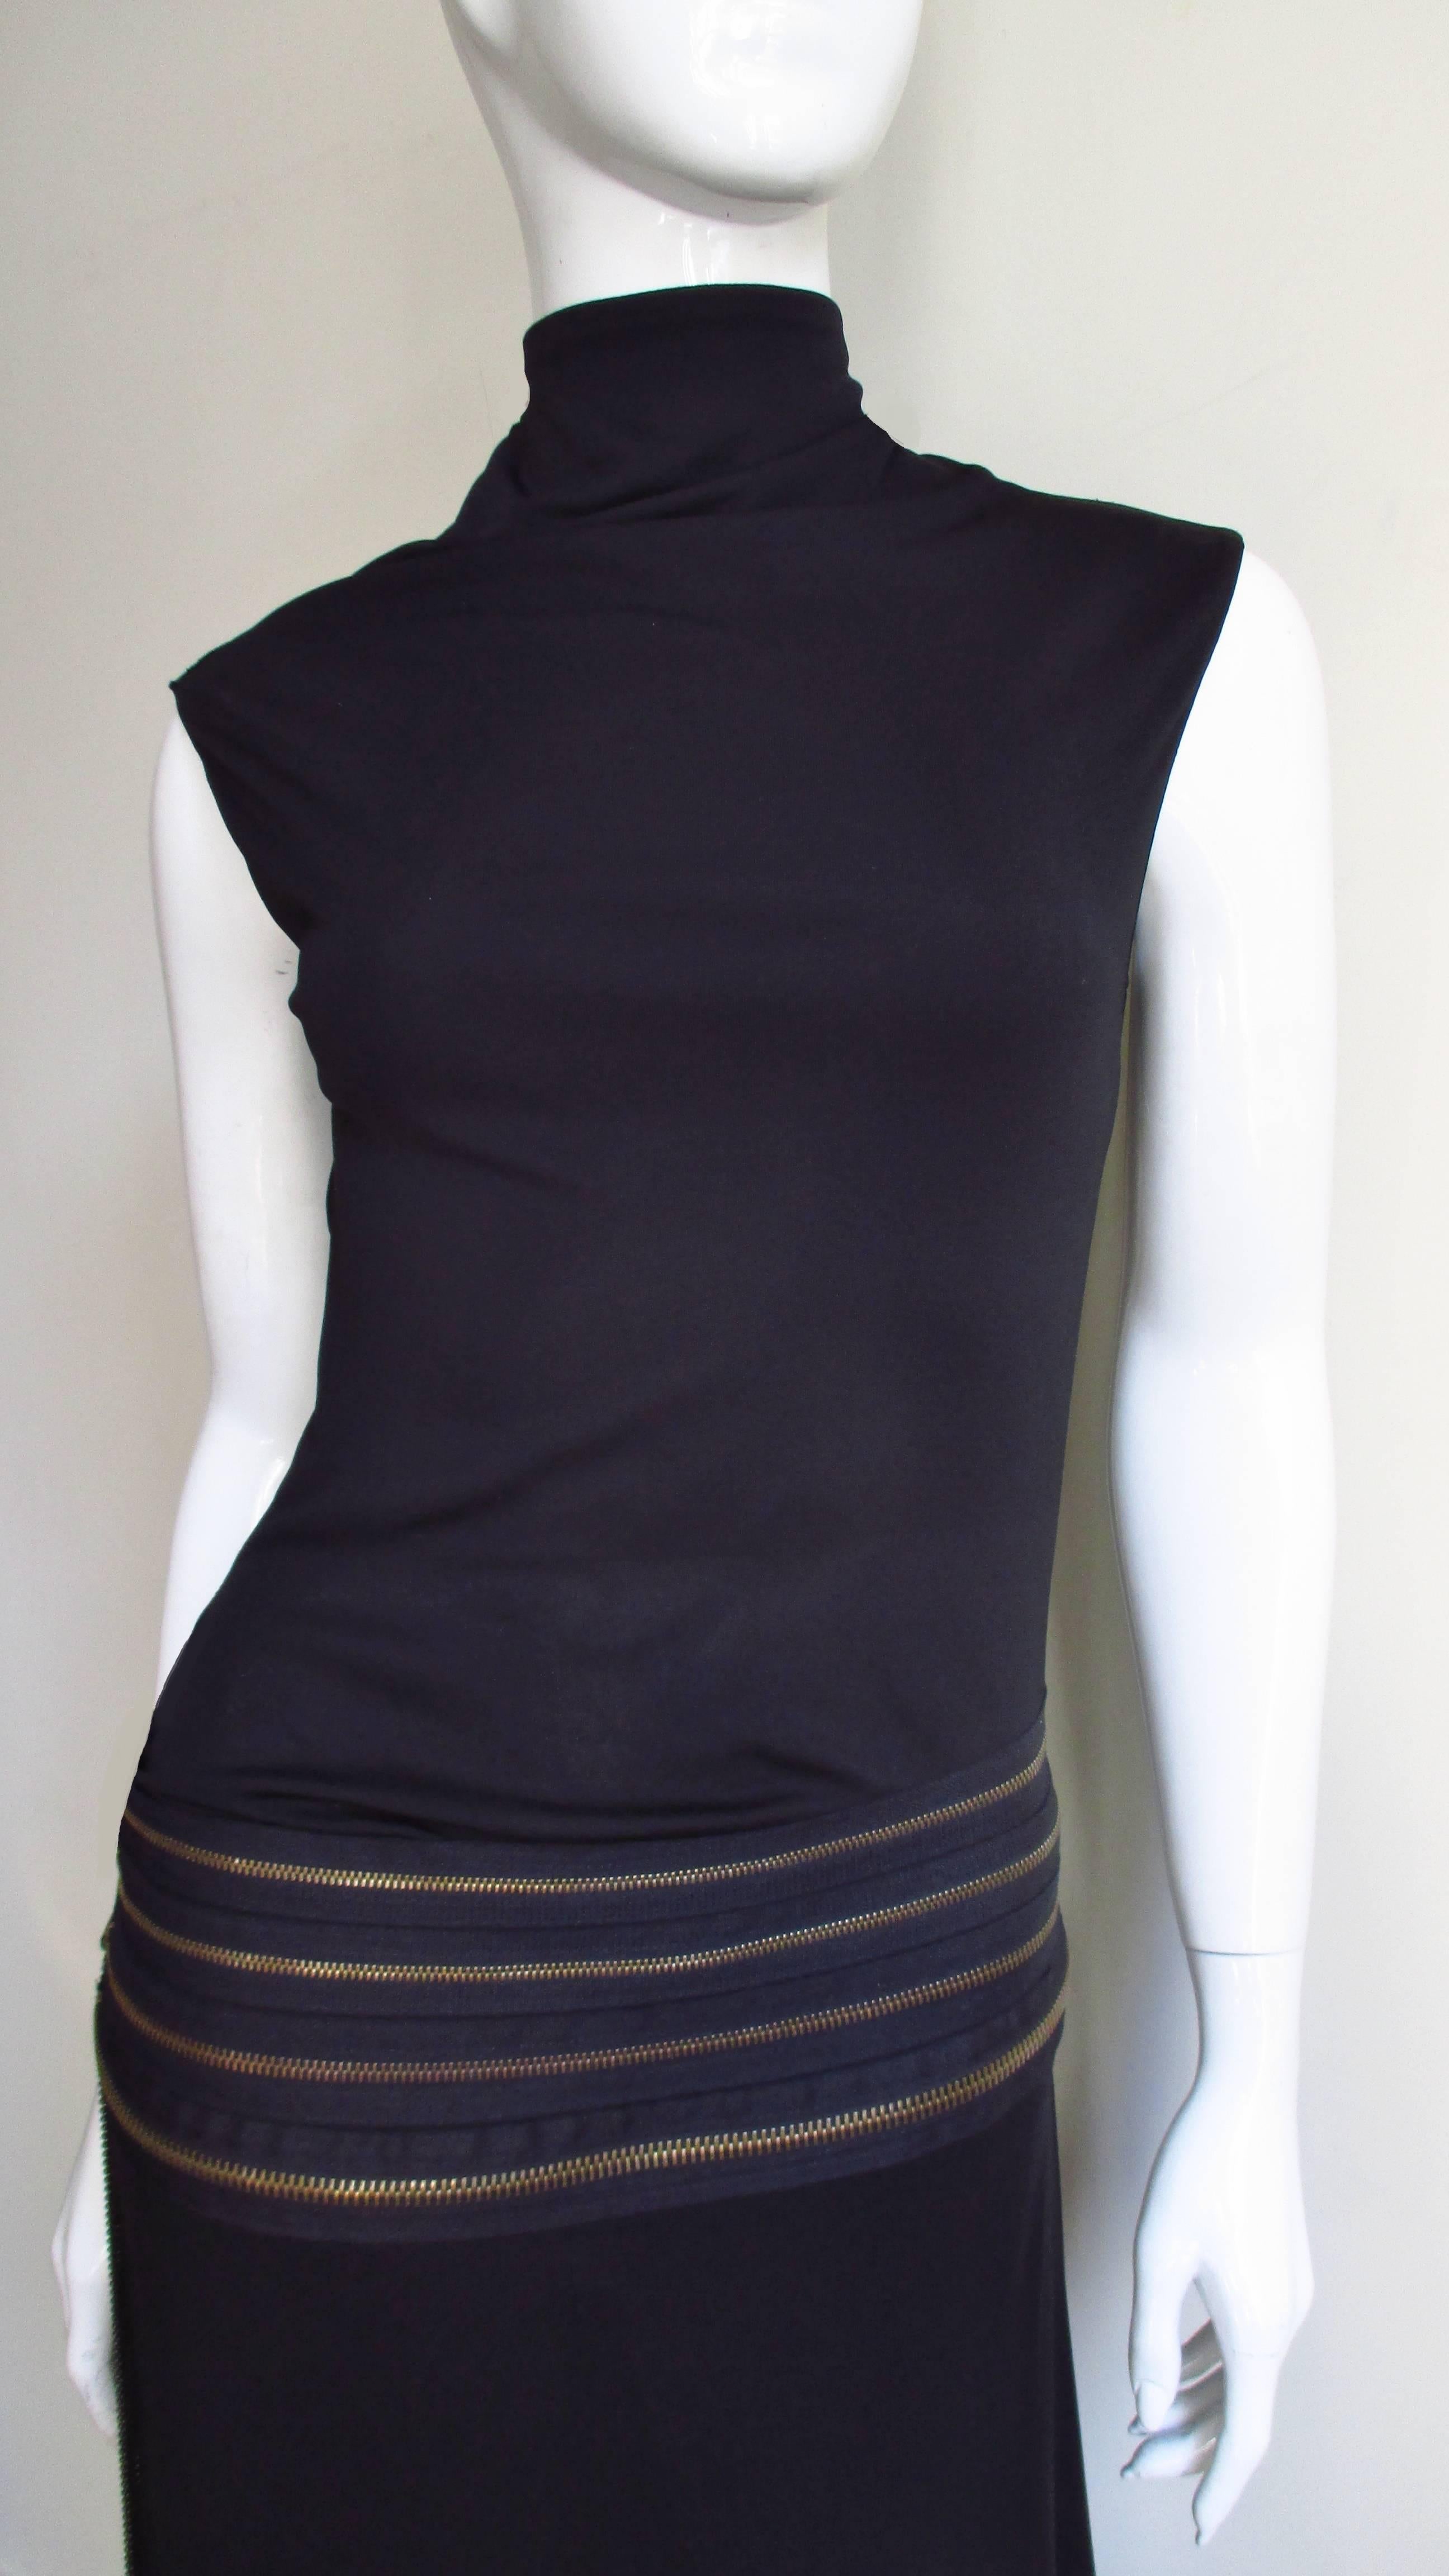 A fabulous black jersey dress from Jean Paul Gaultier.  It has elongated shoulders with a stand up collar and semi fitted through the top.  The hips are accentuated with a band of 4 horizontal functional zippers in burnished gold with long matching